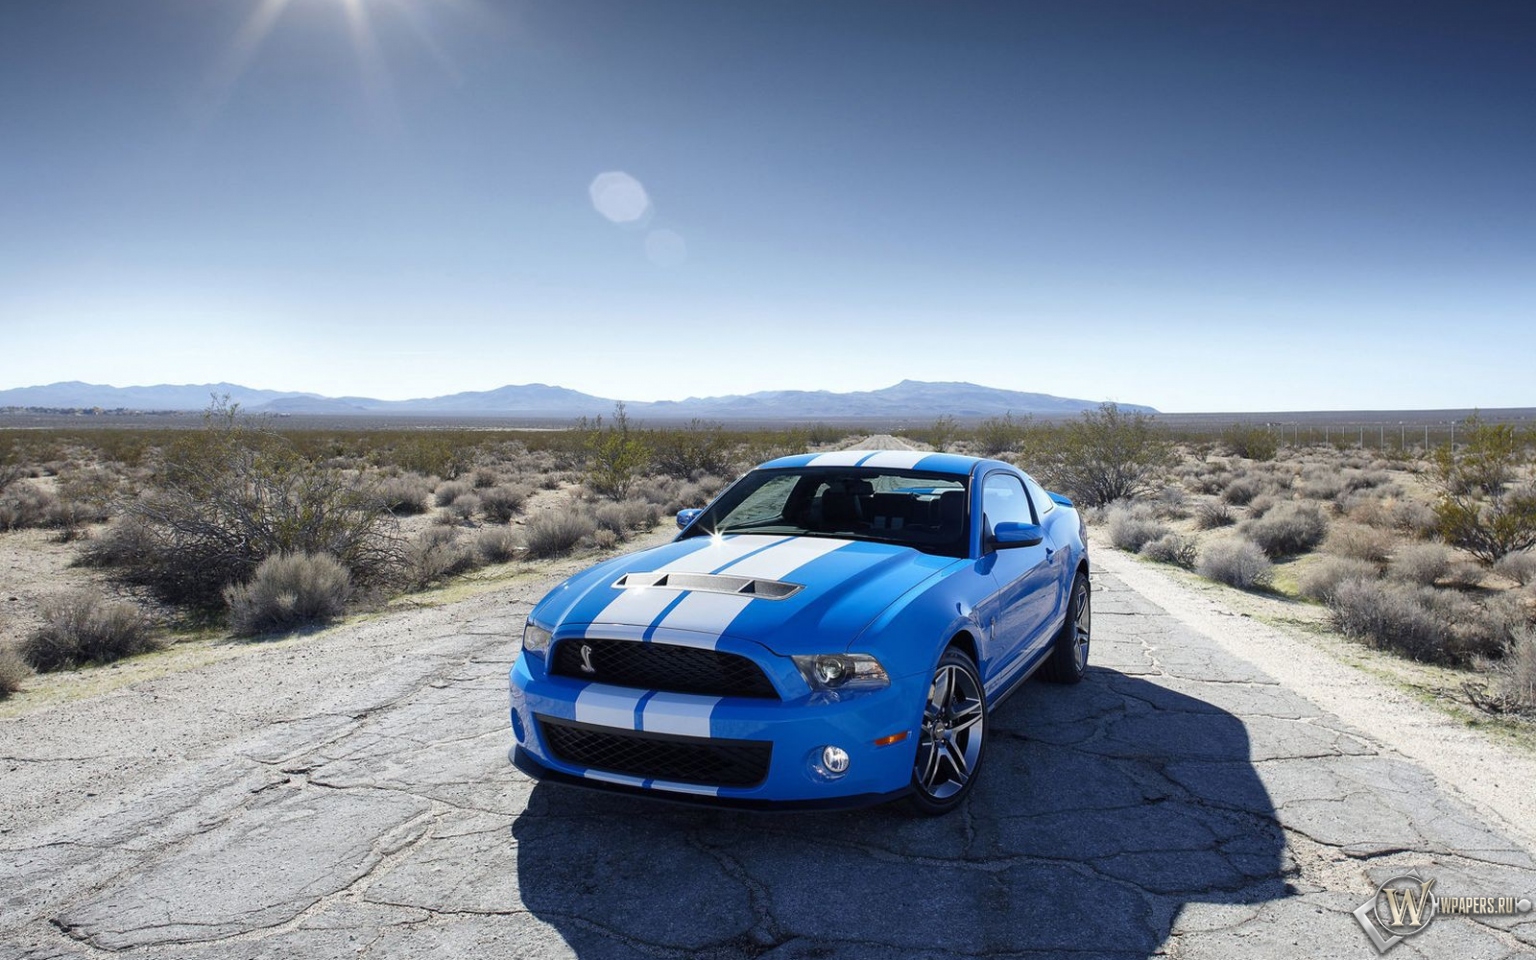 2010 Ford Shelby GT500 1536x960